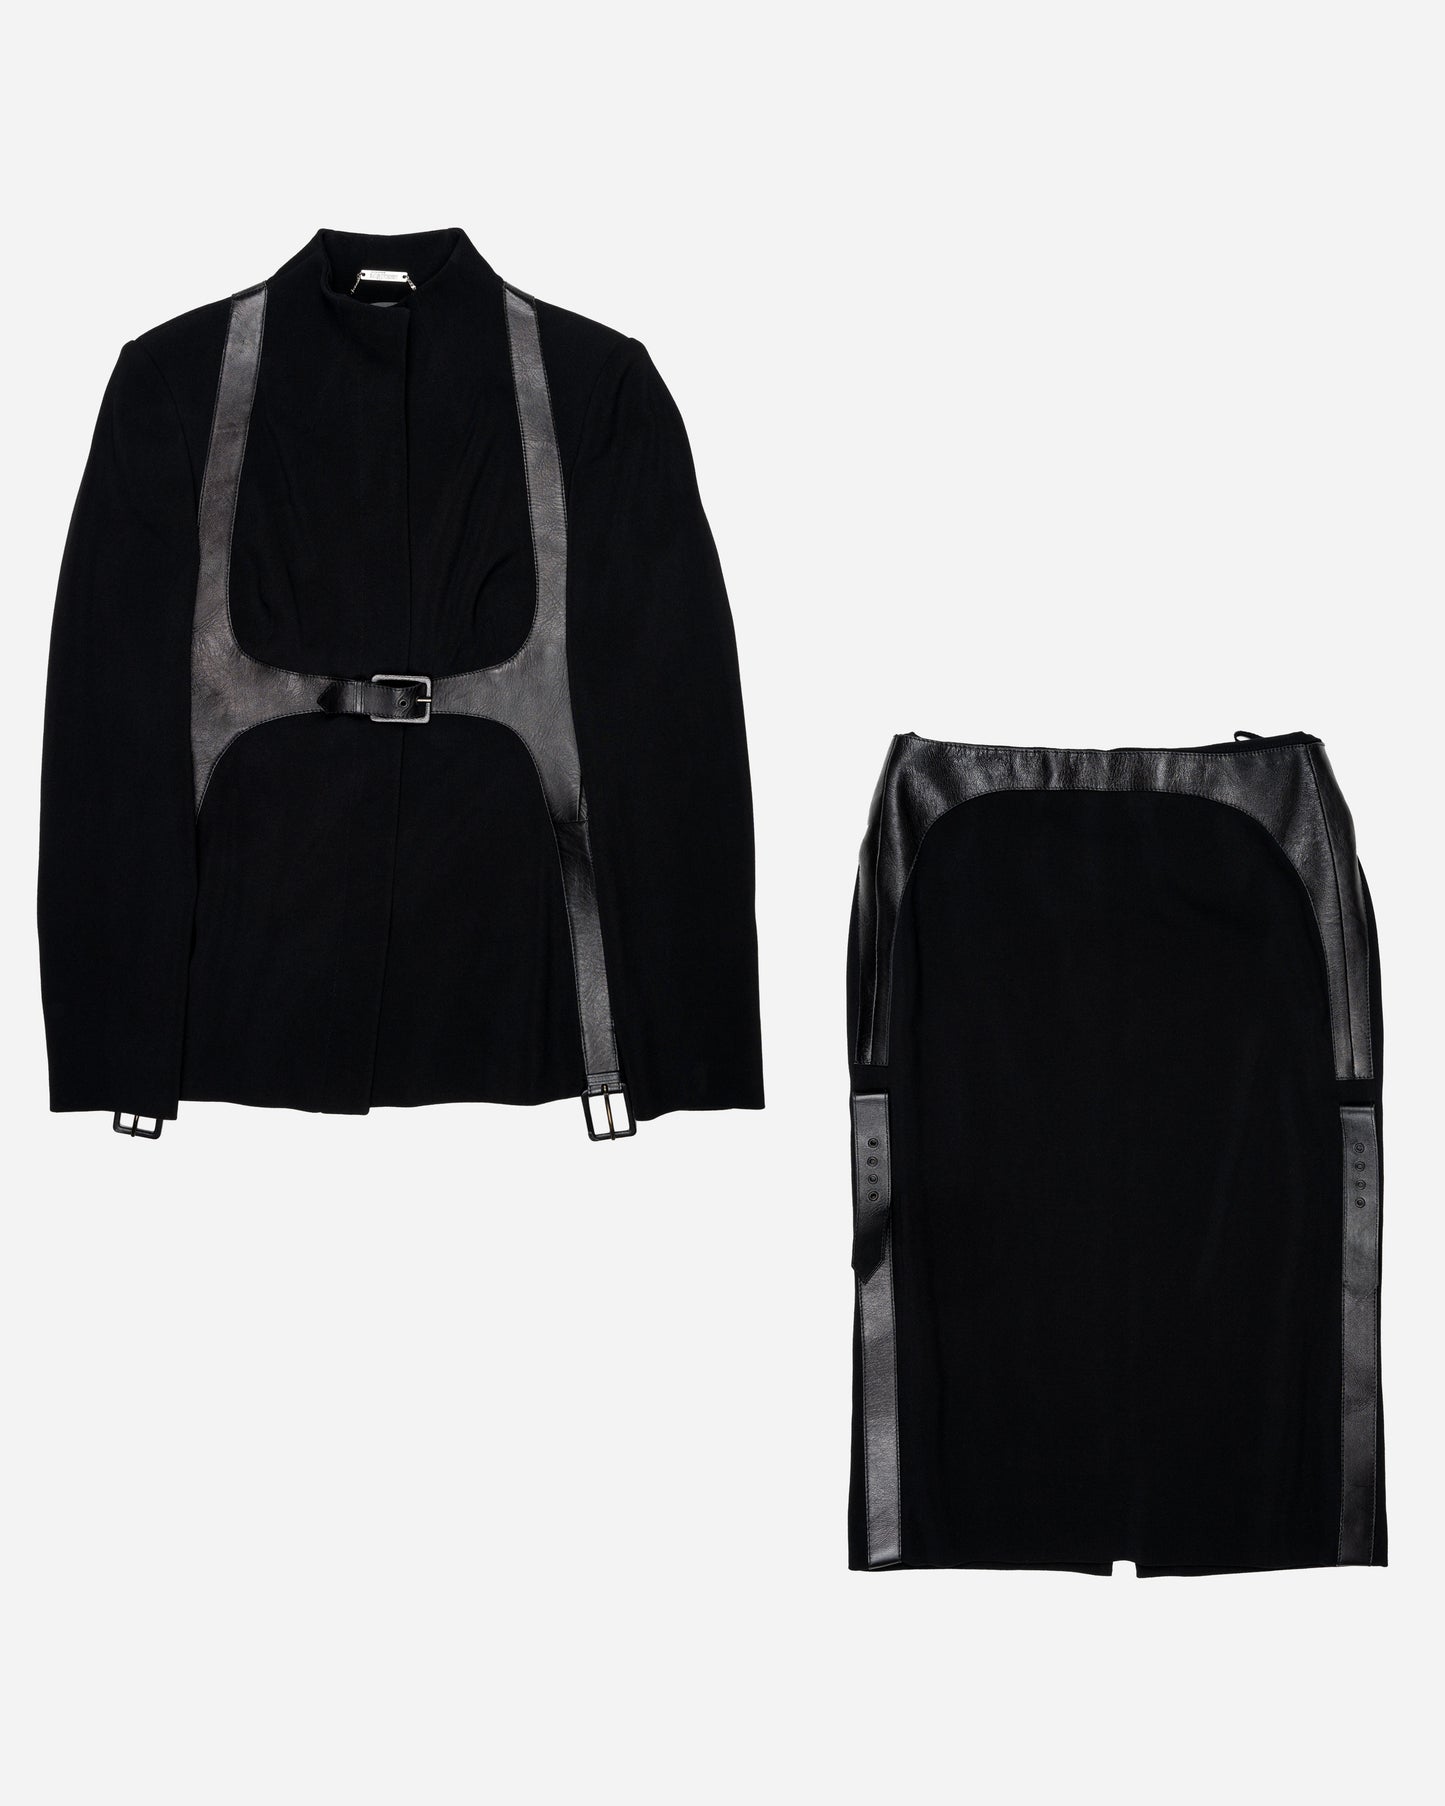 ALEXANDER McQUEEN A/W 2002 "Supercalifragilistic" Leather Harness Skirt Suit Set